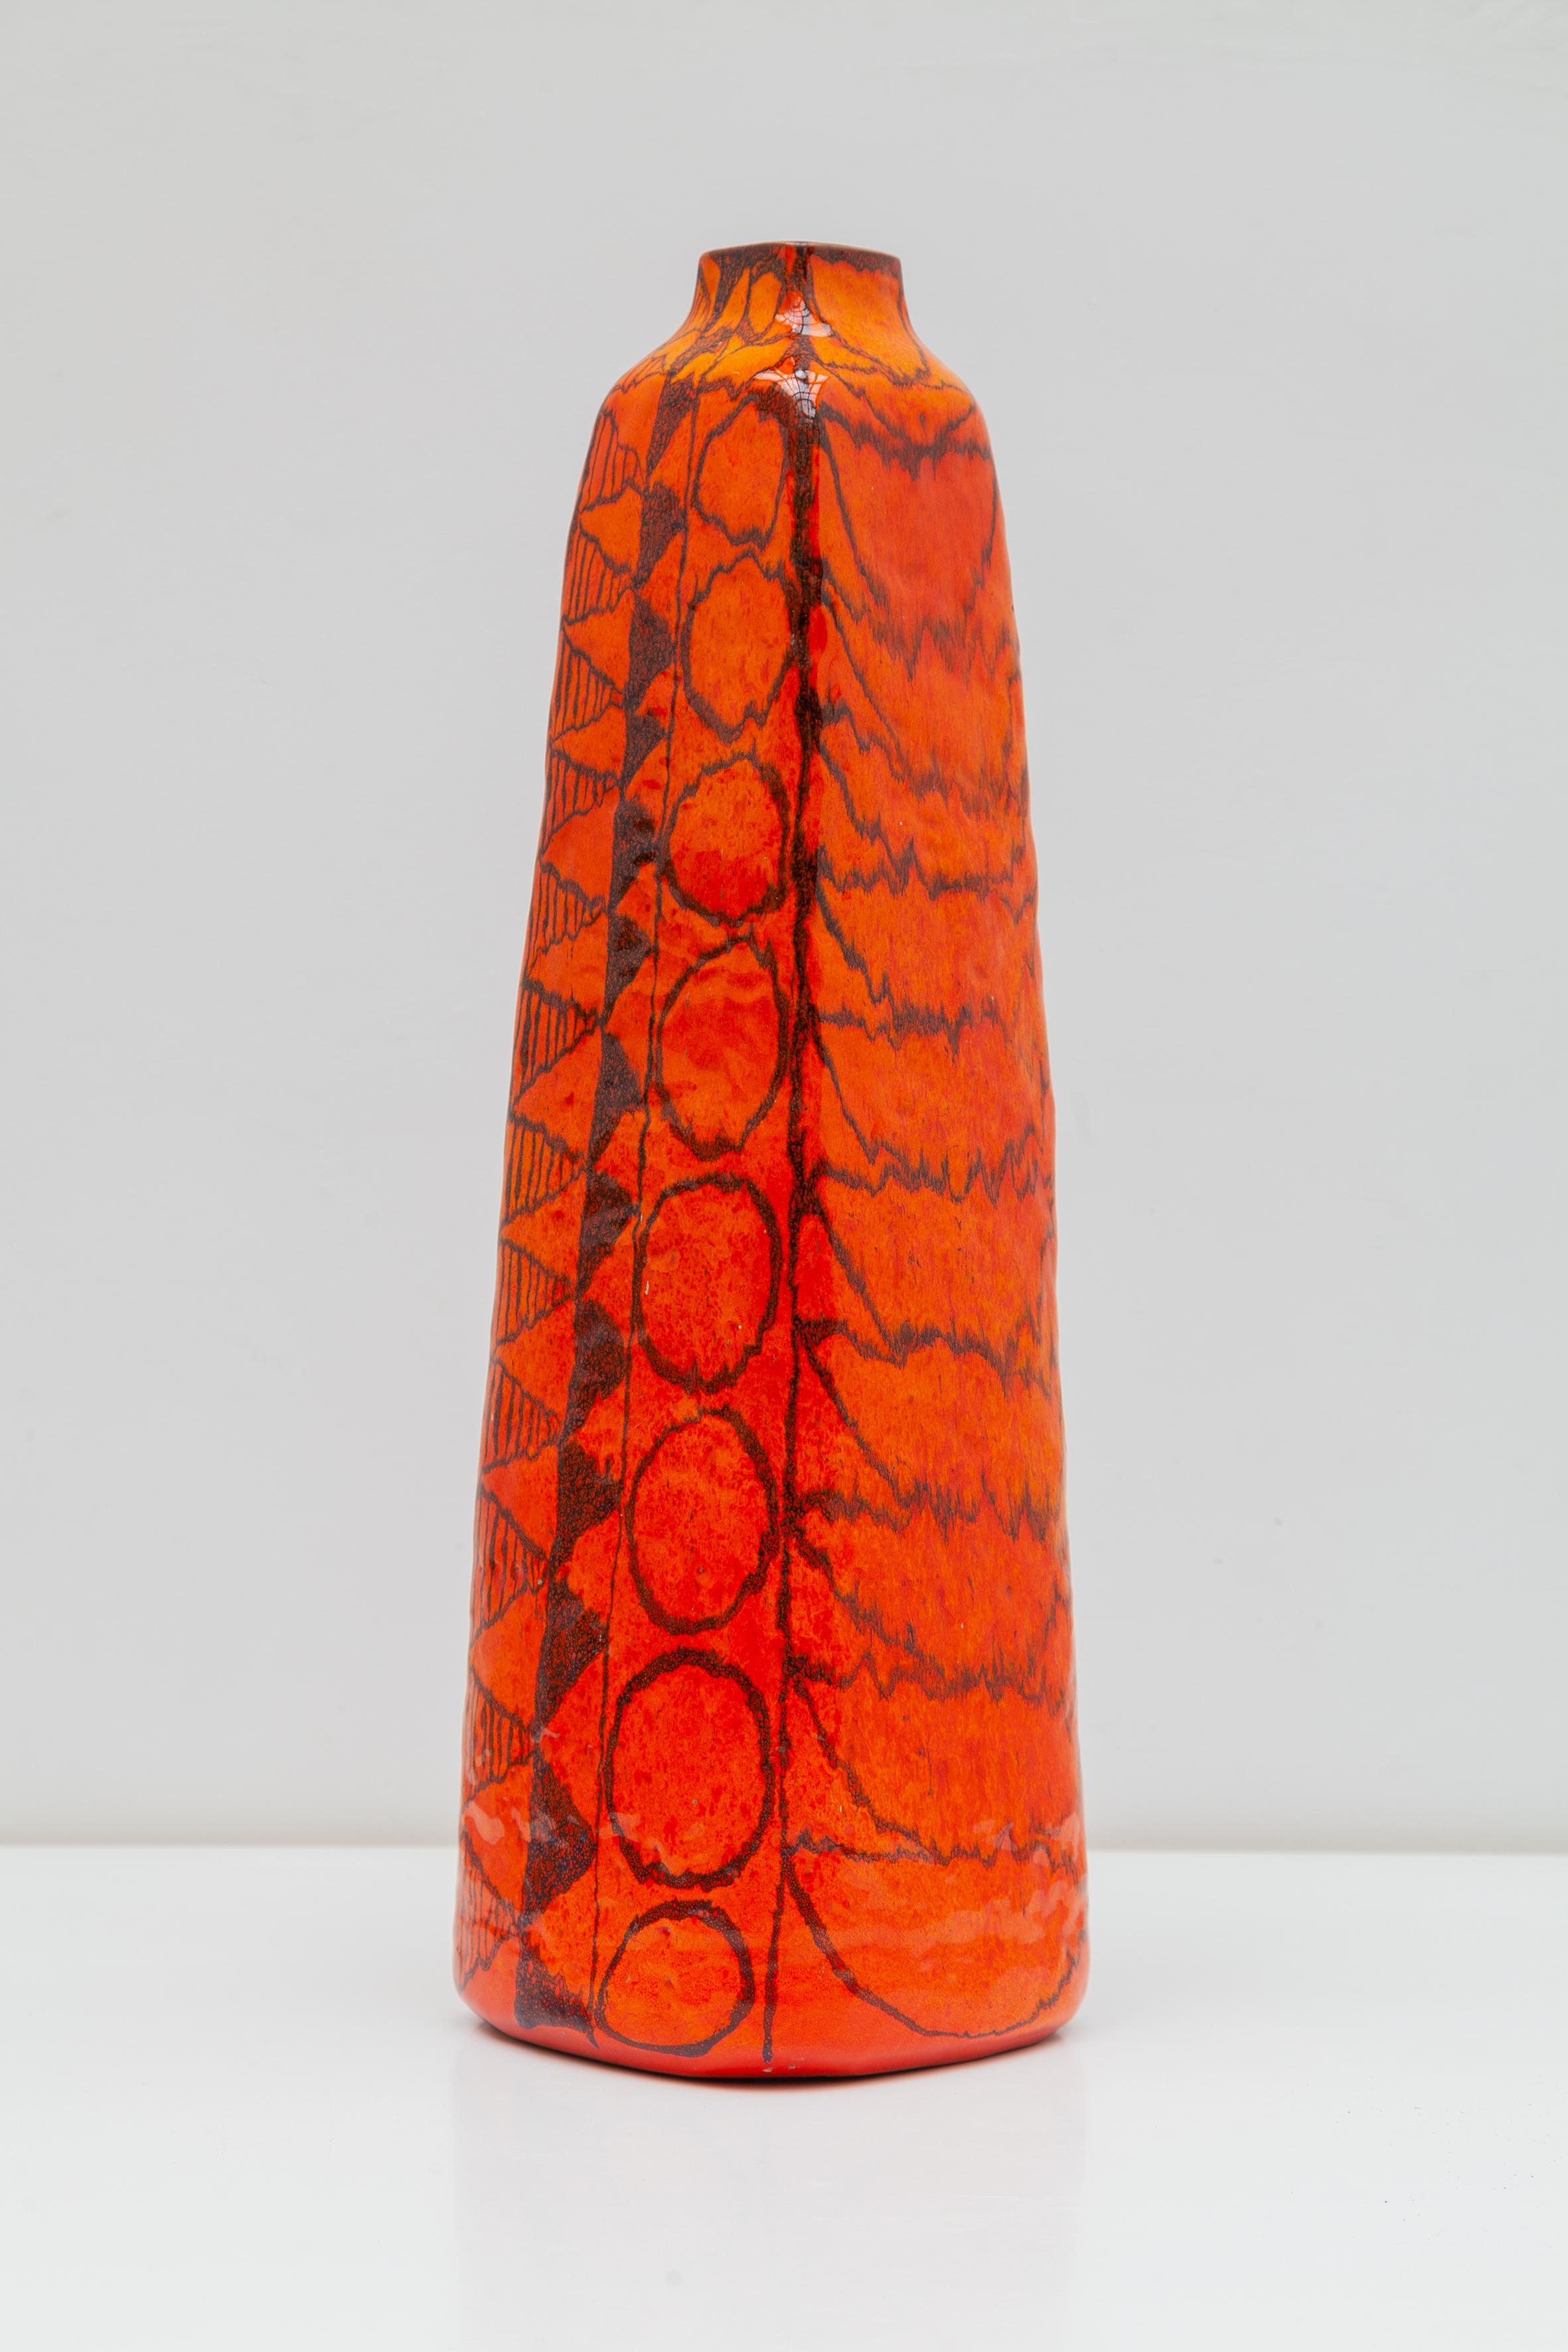 Large vintage midcentury vase in Amphora style made by Torviscosa, Italy 1960s.Two-colored glazes, bright orange, and black geometric design. The Interior is smooth with a black glaze. 
Signed on underside with manufacturer’s marks.